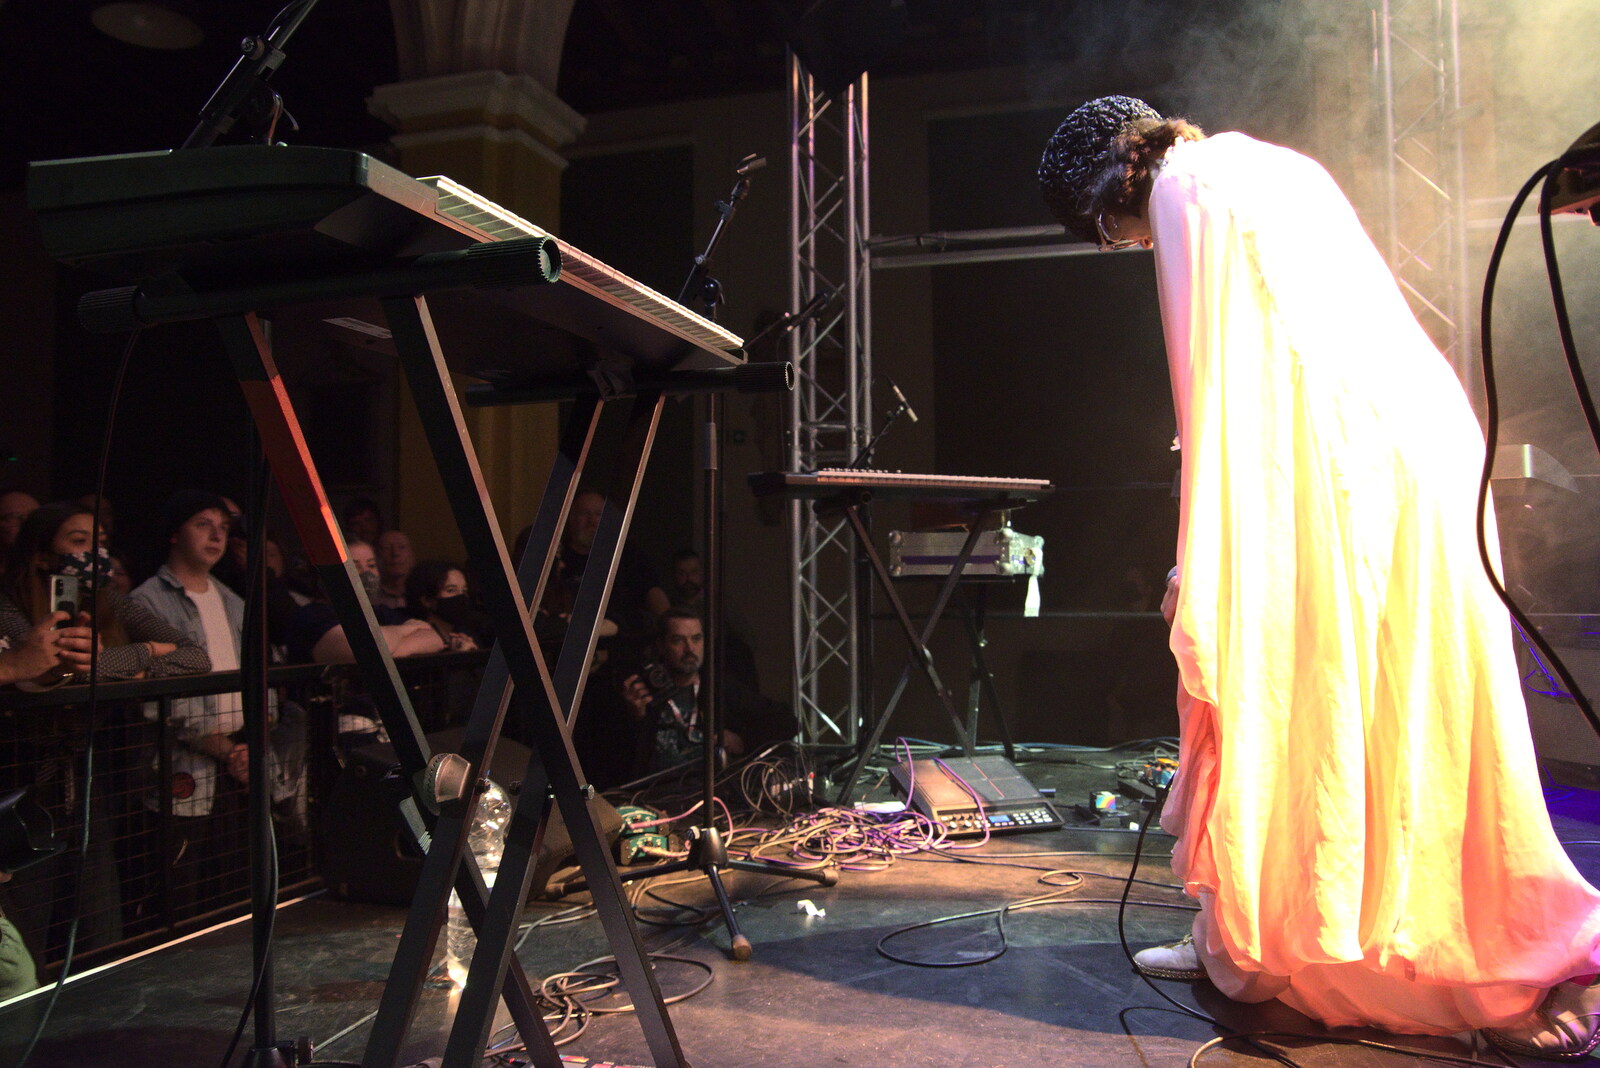 Vanity Fairy and Let's Eat Grandma, Arts Centre, Norwich - 26th January 2022: Daisy bows to the audience